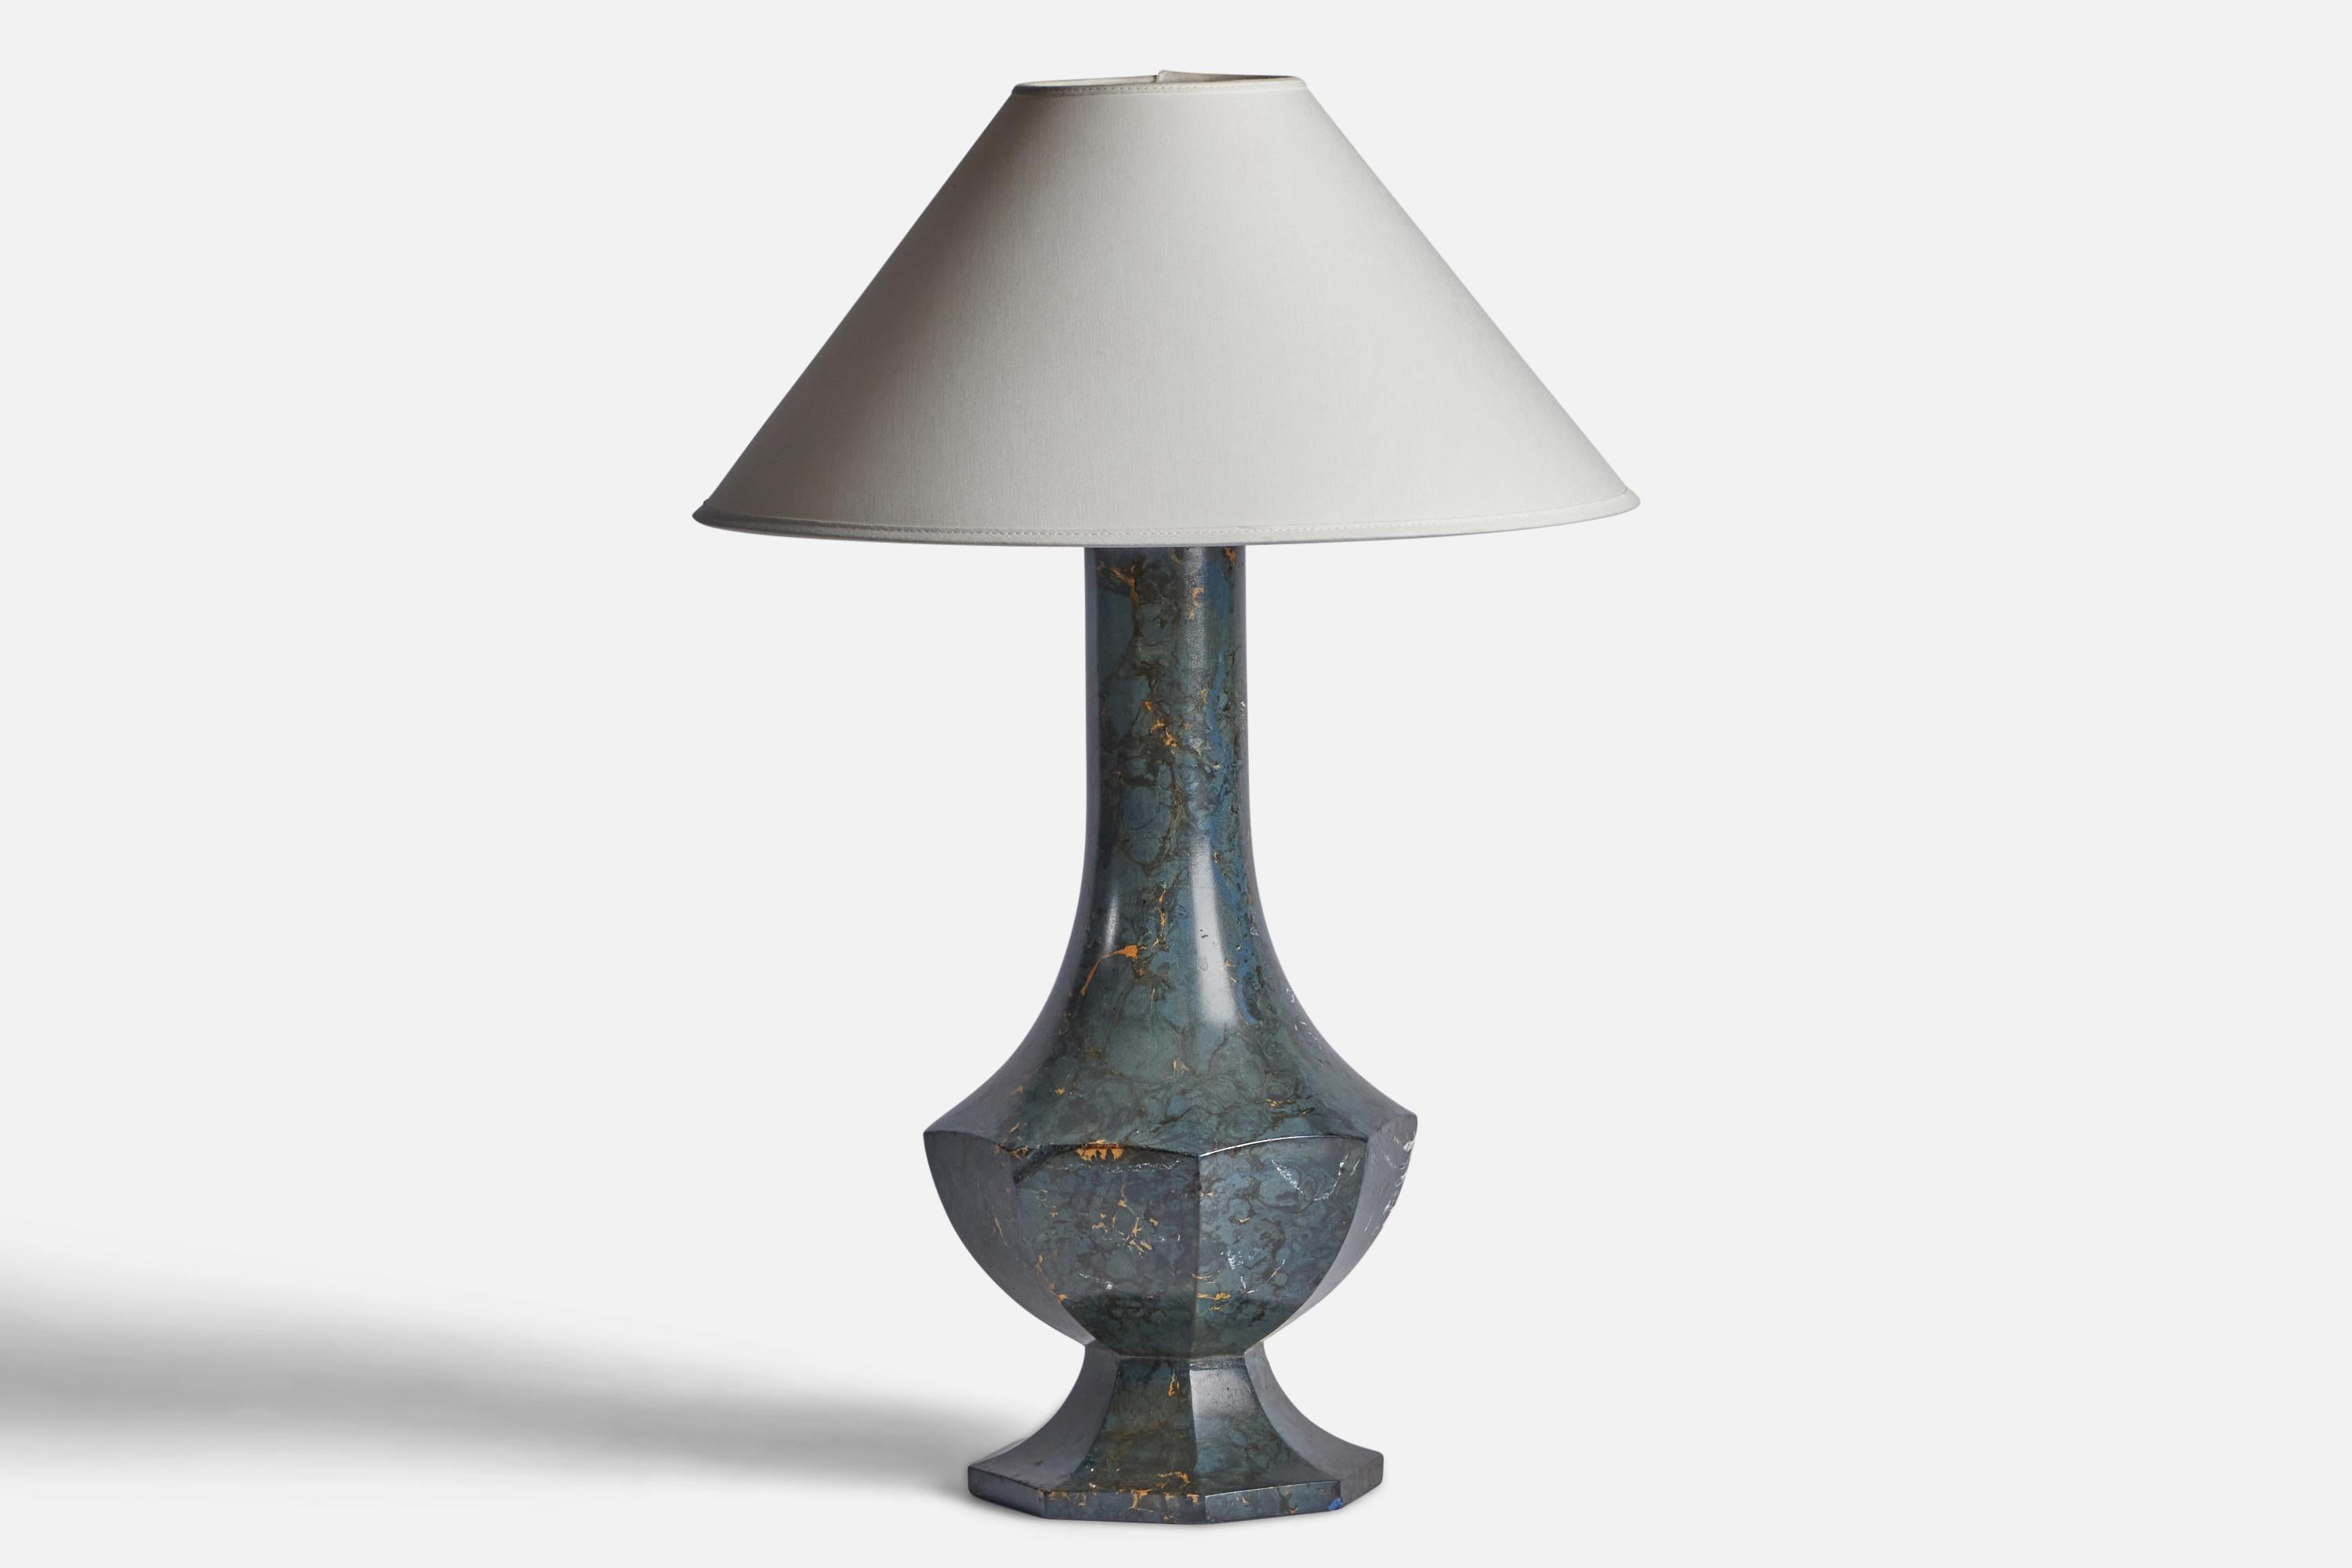 A blue-glazed ceramic table lamp designed and produced in Sweden, c. 1920s.

Dimensions of Lamp (inches): 19” H x 8.45” Diameter
Dimensions of Shade (inches): 4.5” Top Diameter x 16” Bottom Diameter x 7.15” H 
Dimensions of Lamp with Shade (inches):